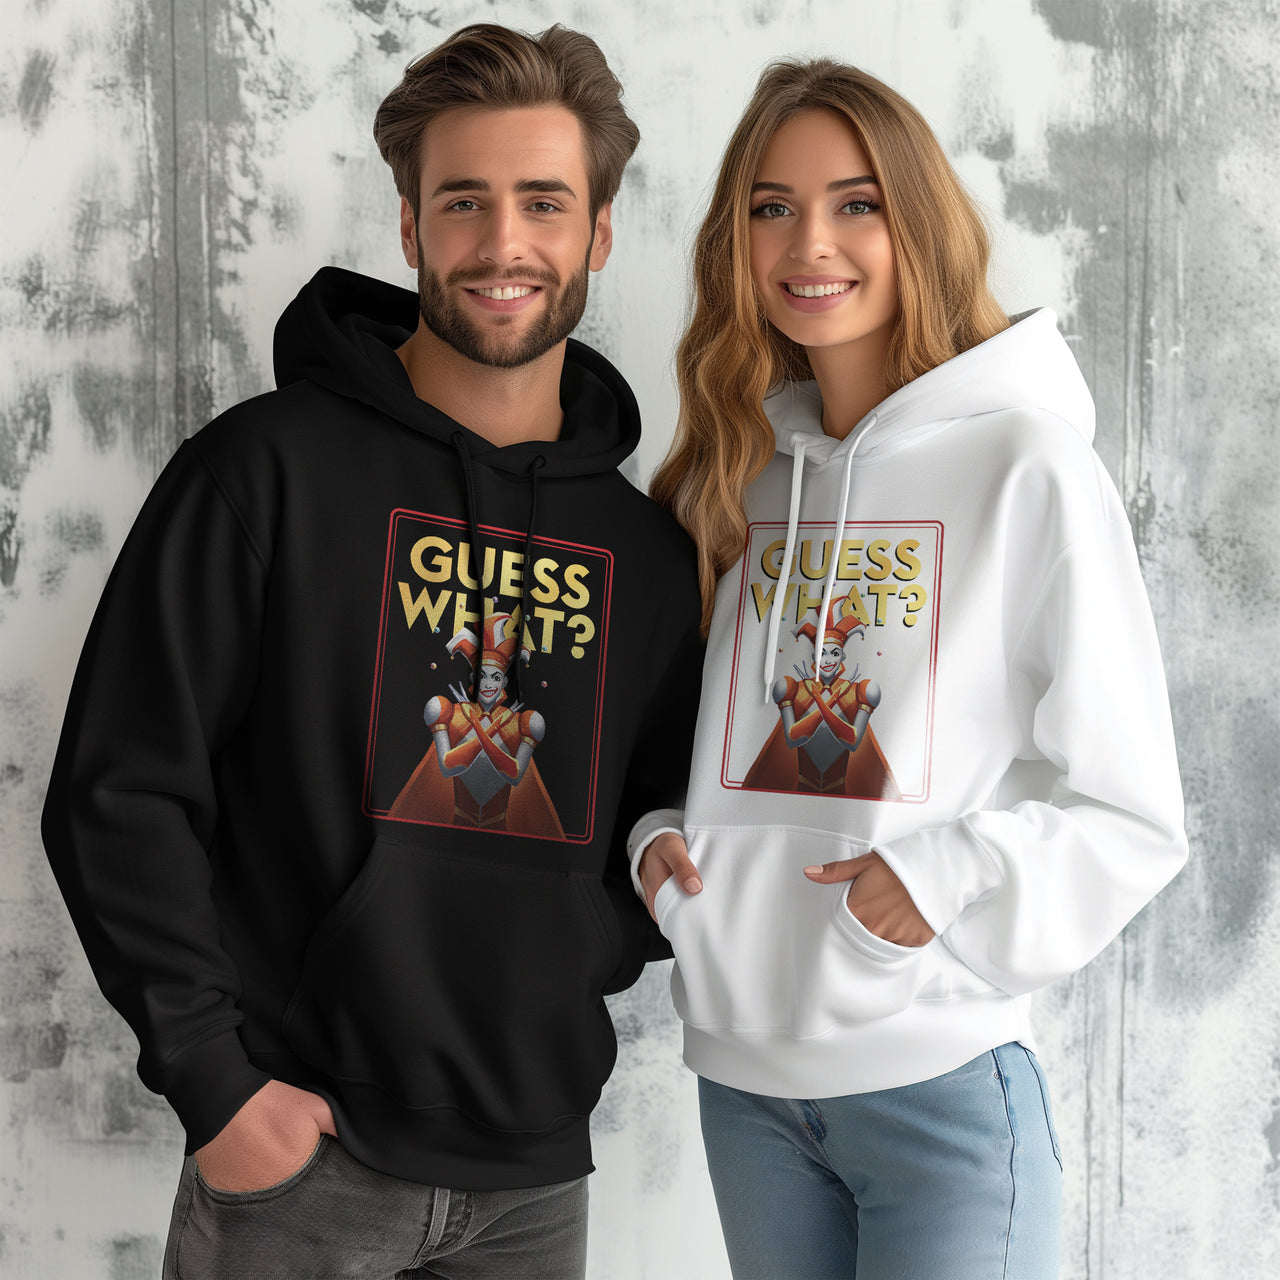 Guess What Classic Unisex Pullover Hoodie